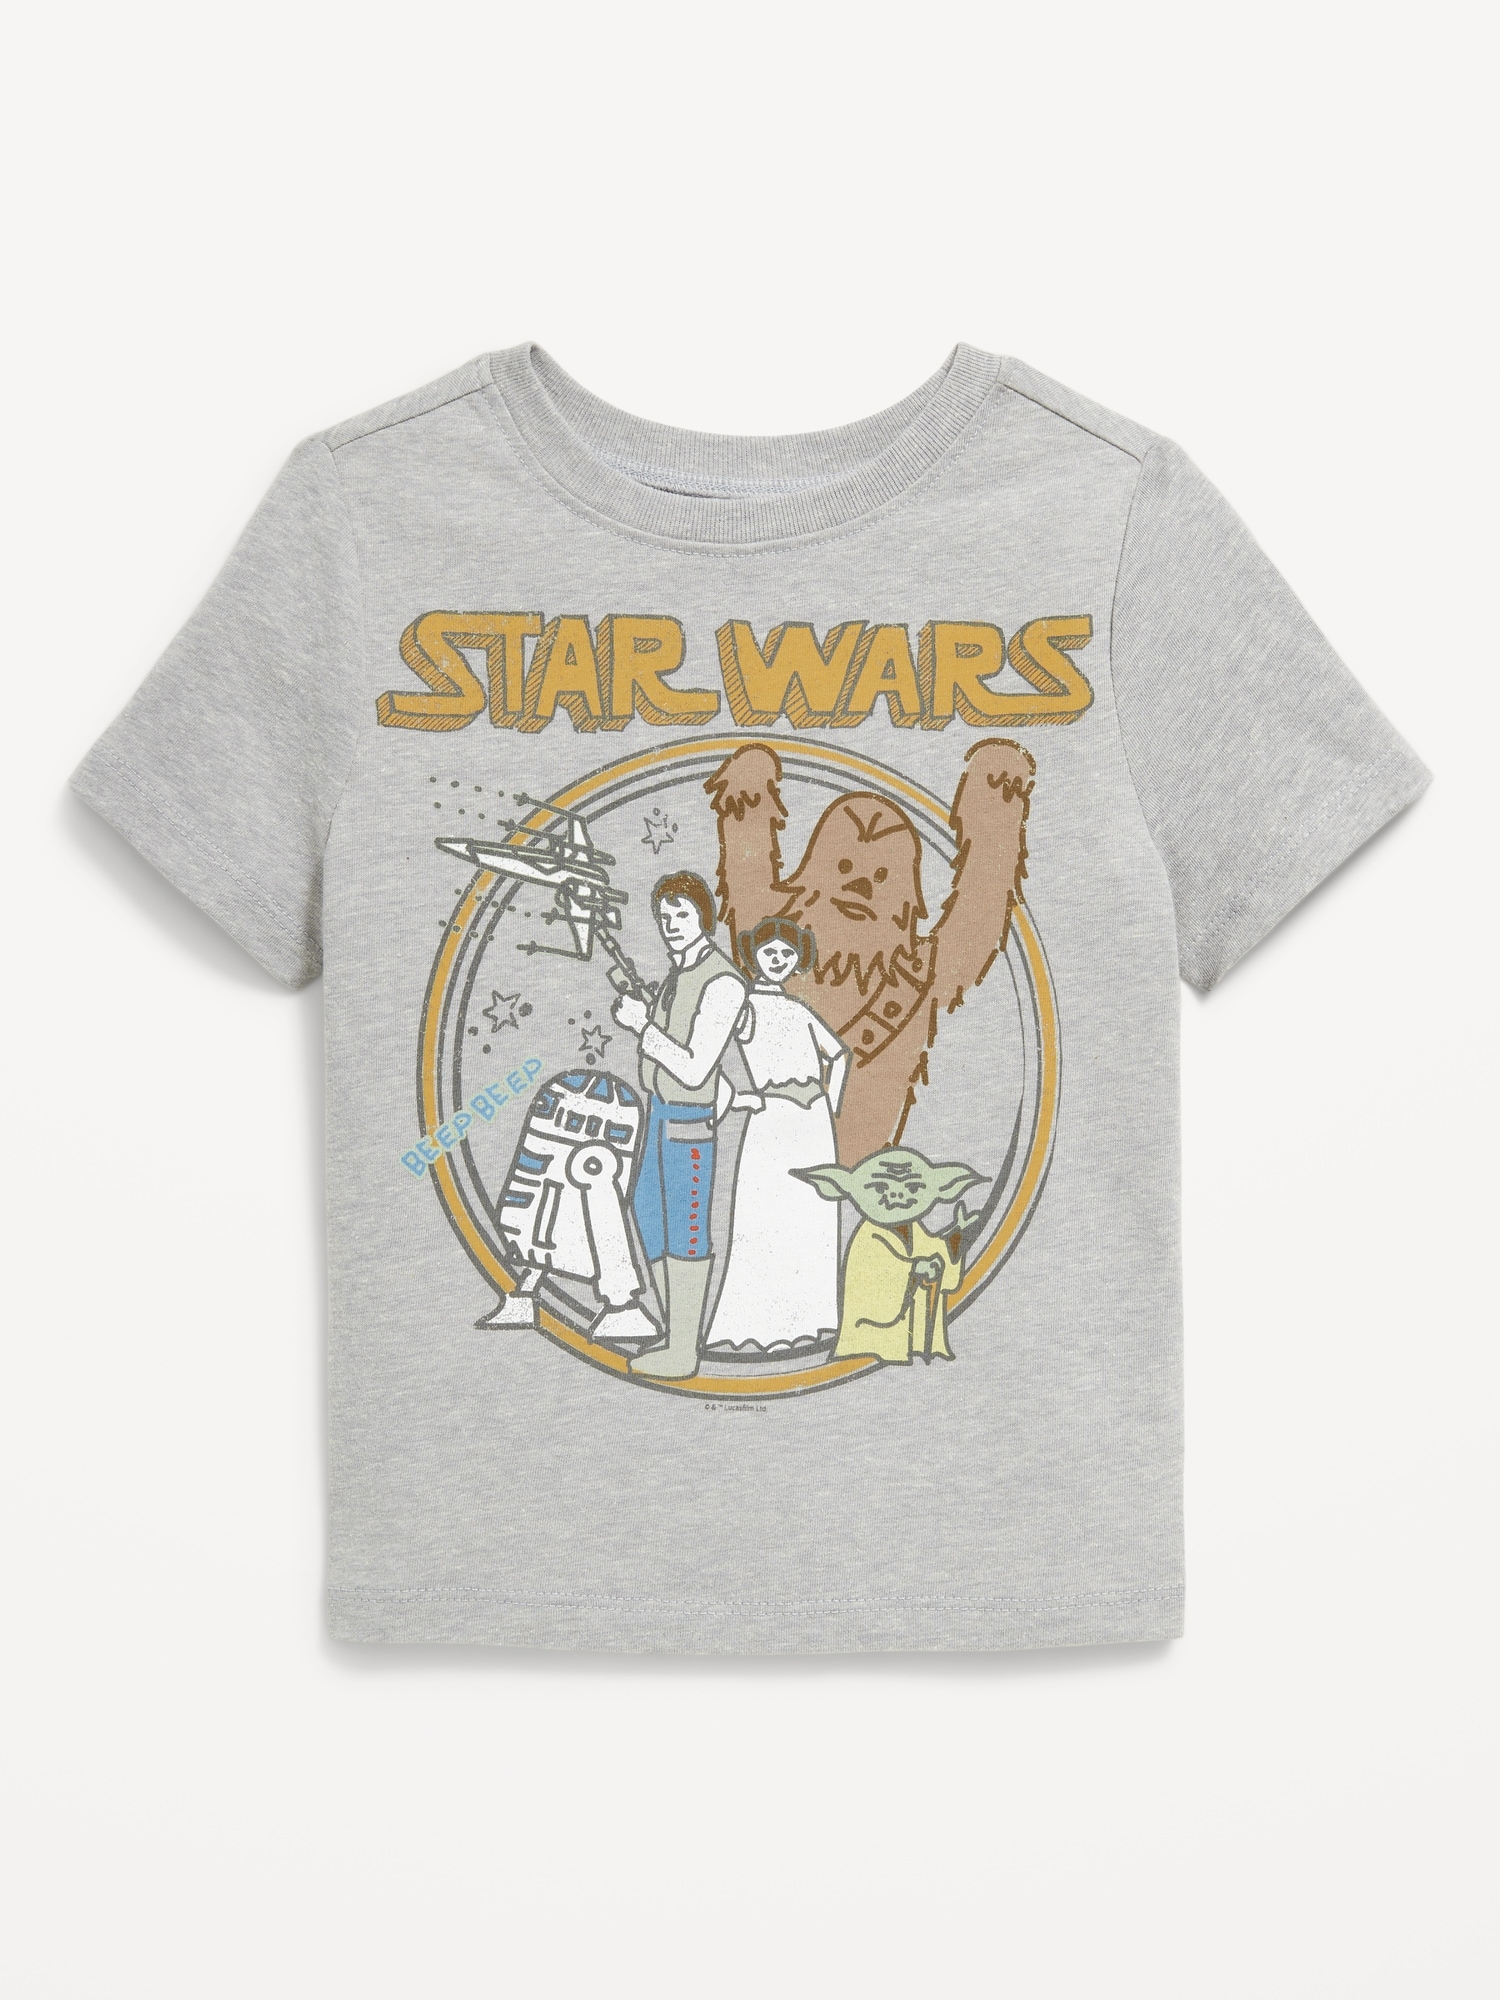 Star Wars Unisex Graphic T-Shirt for Toddler